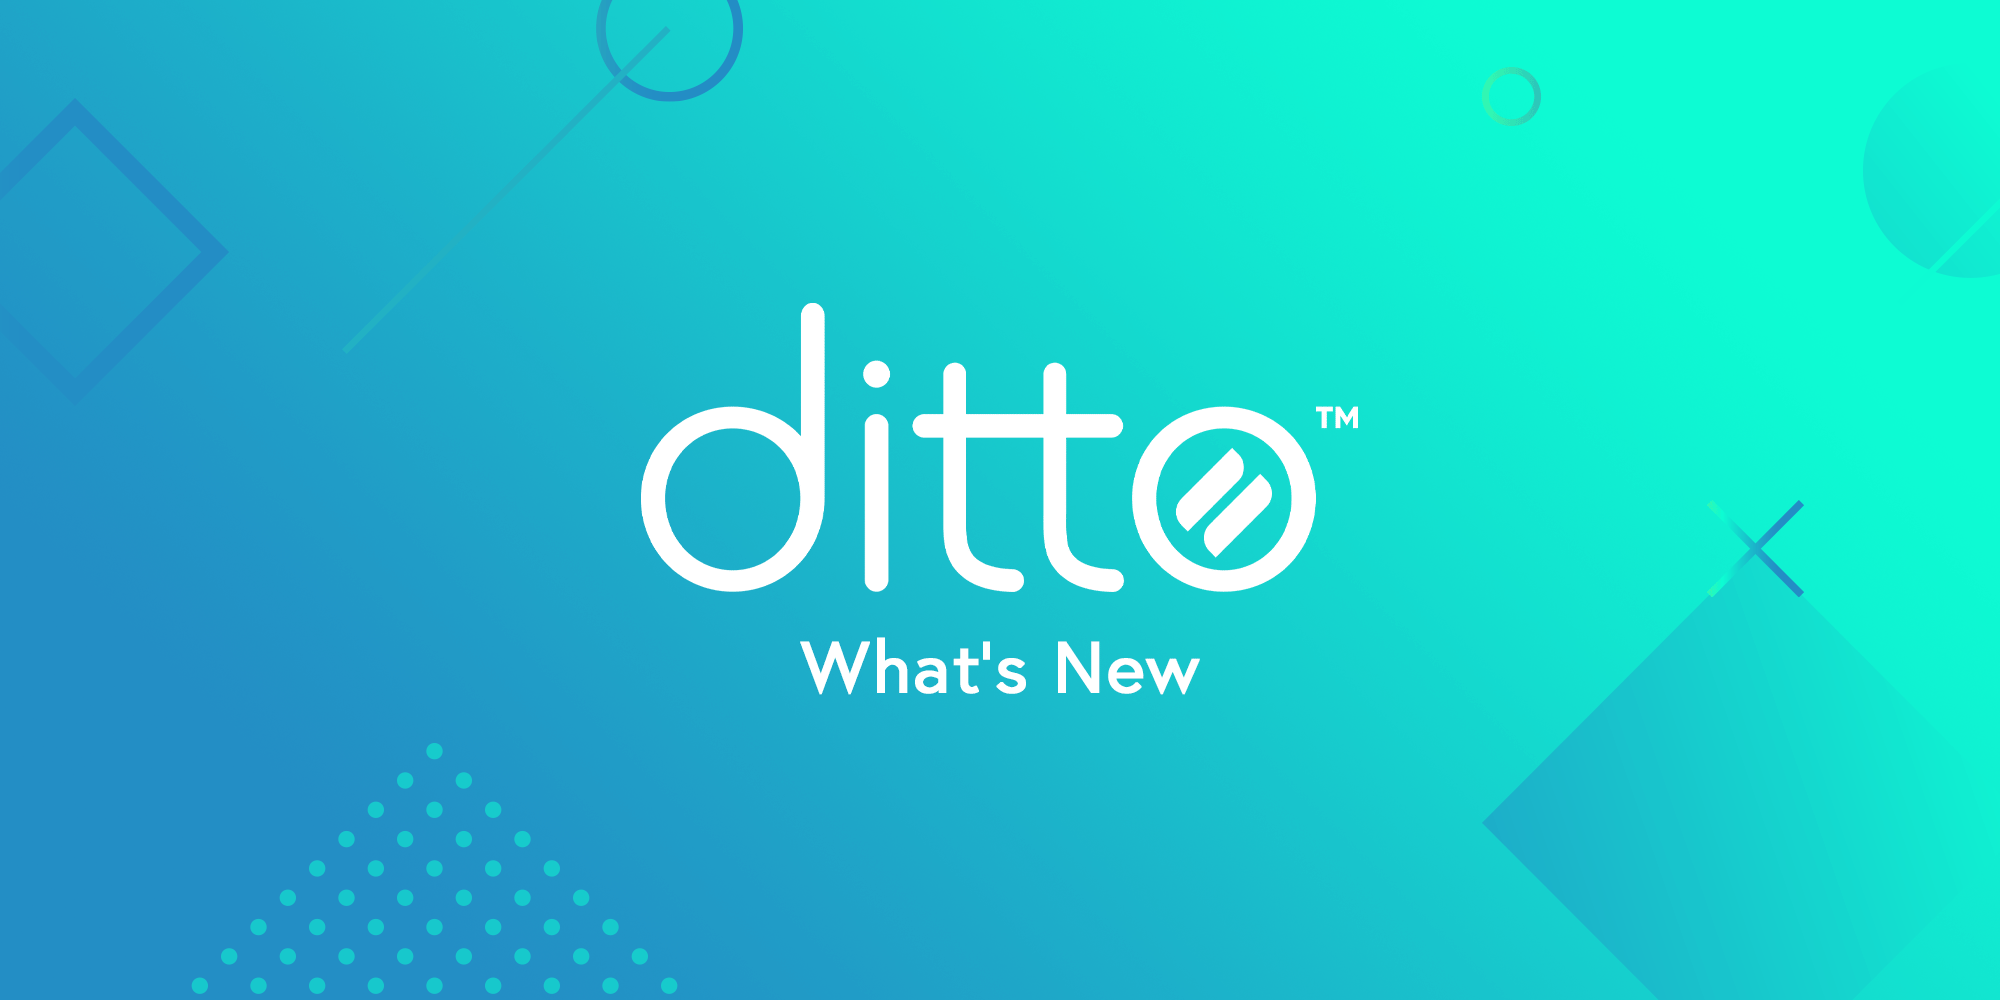 D.I.T.T.O: What does DITTO mean in Business? Drop In To